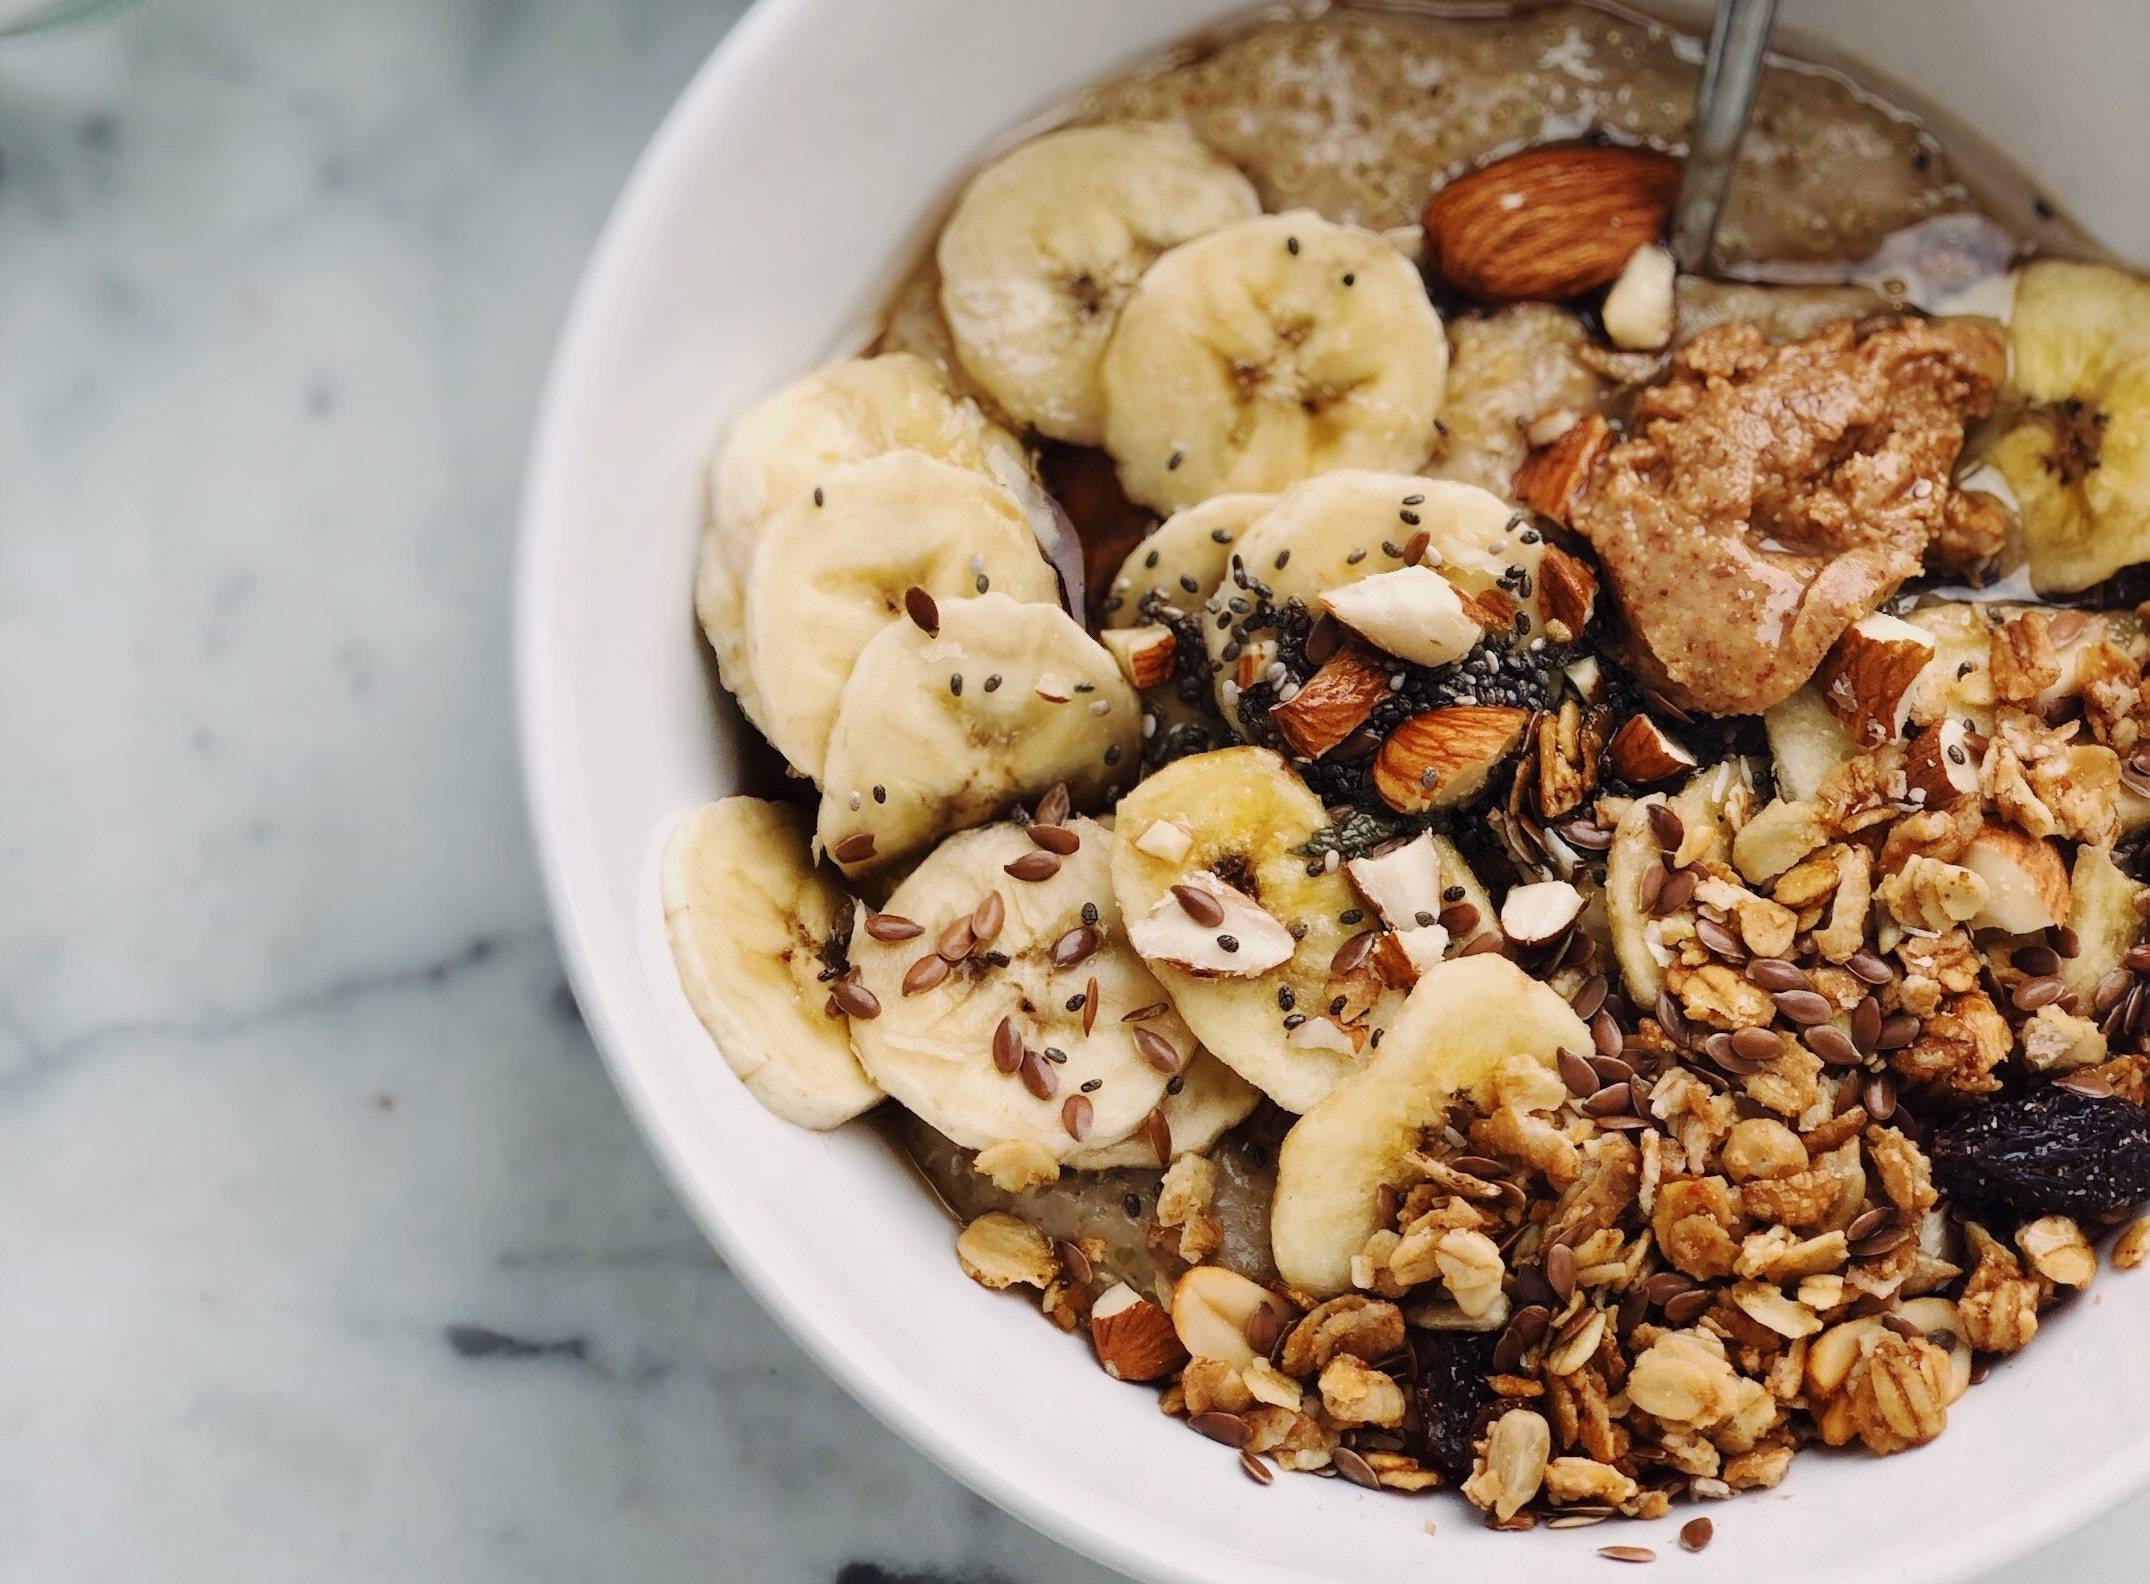 Porridge with bananas and nuts